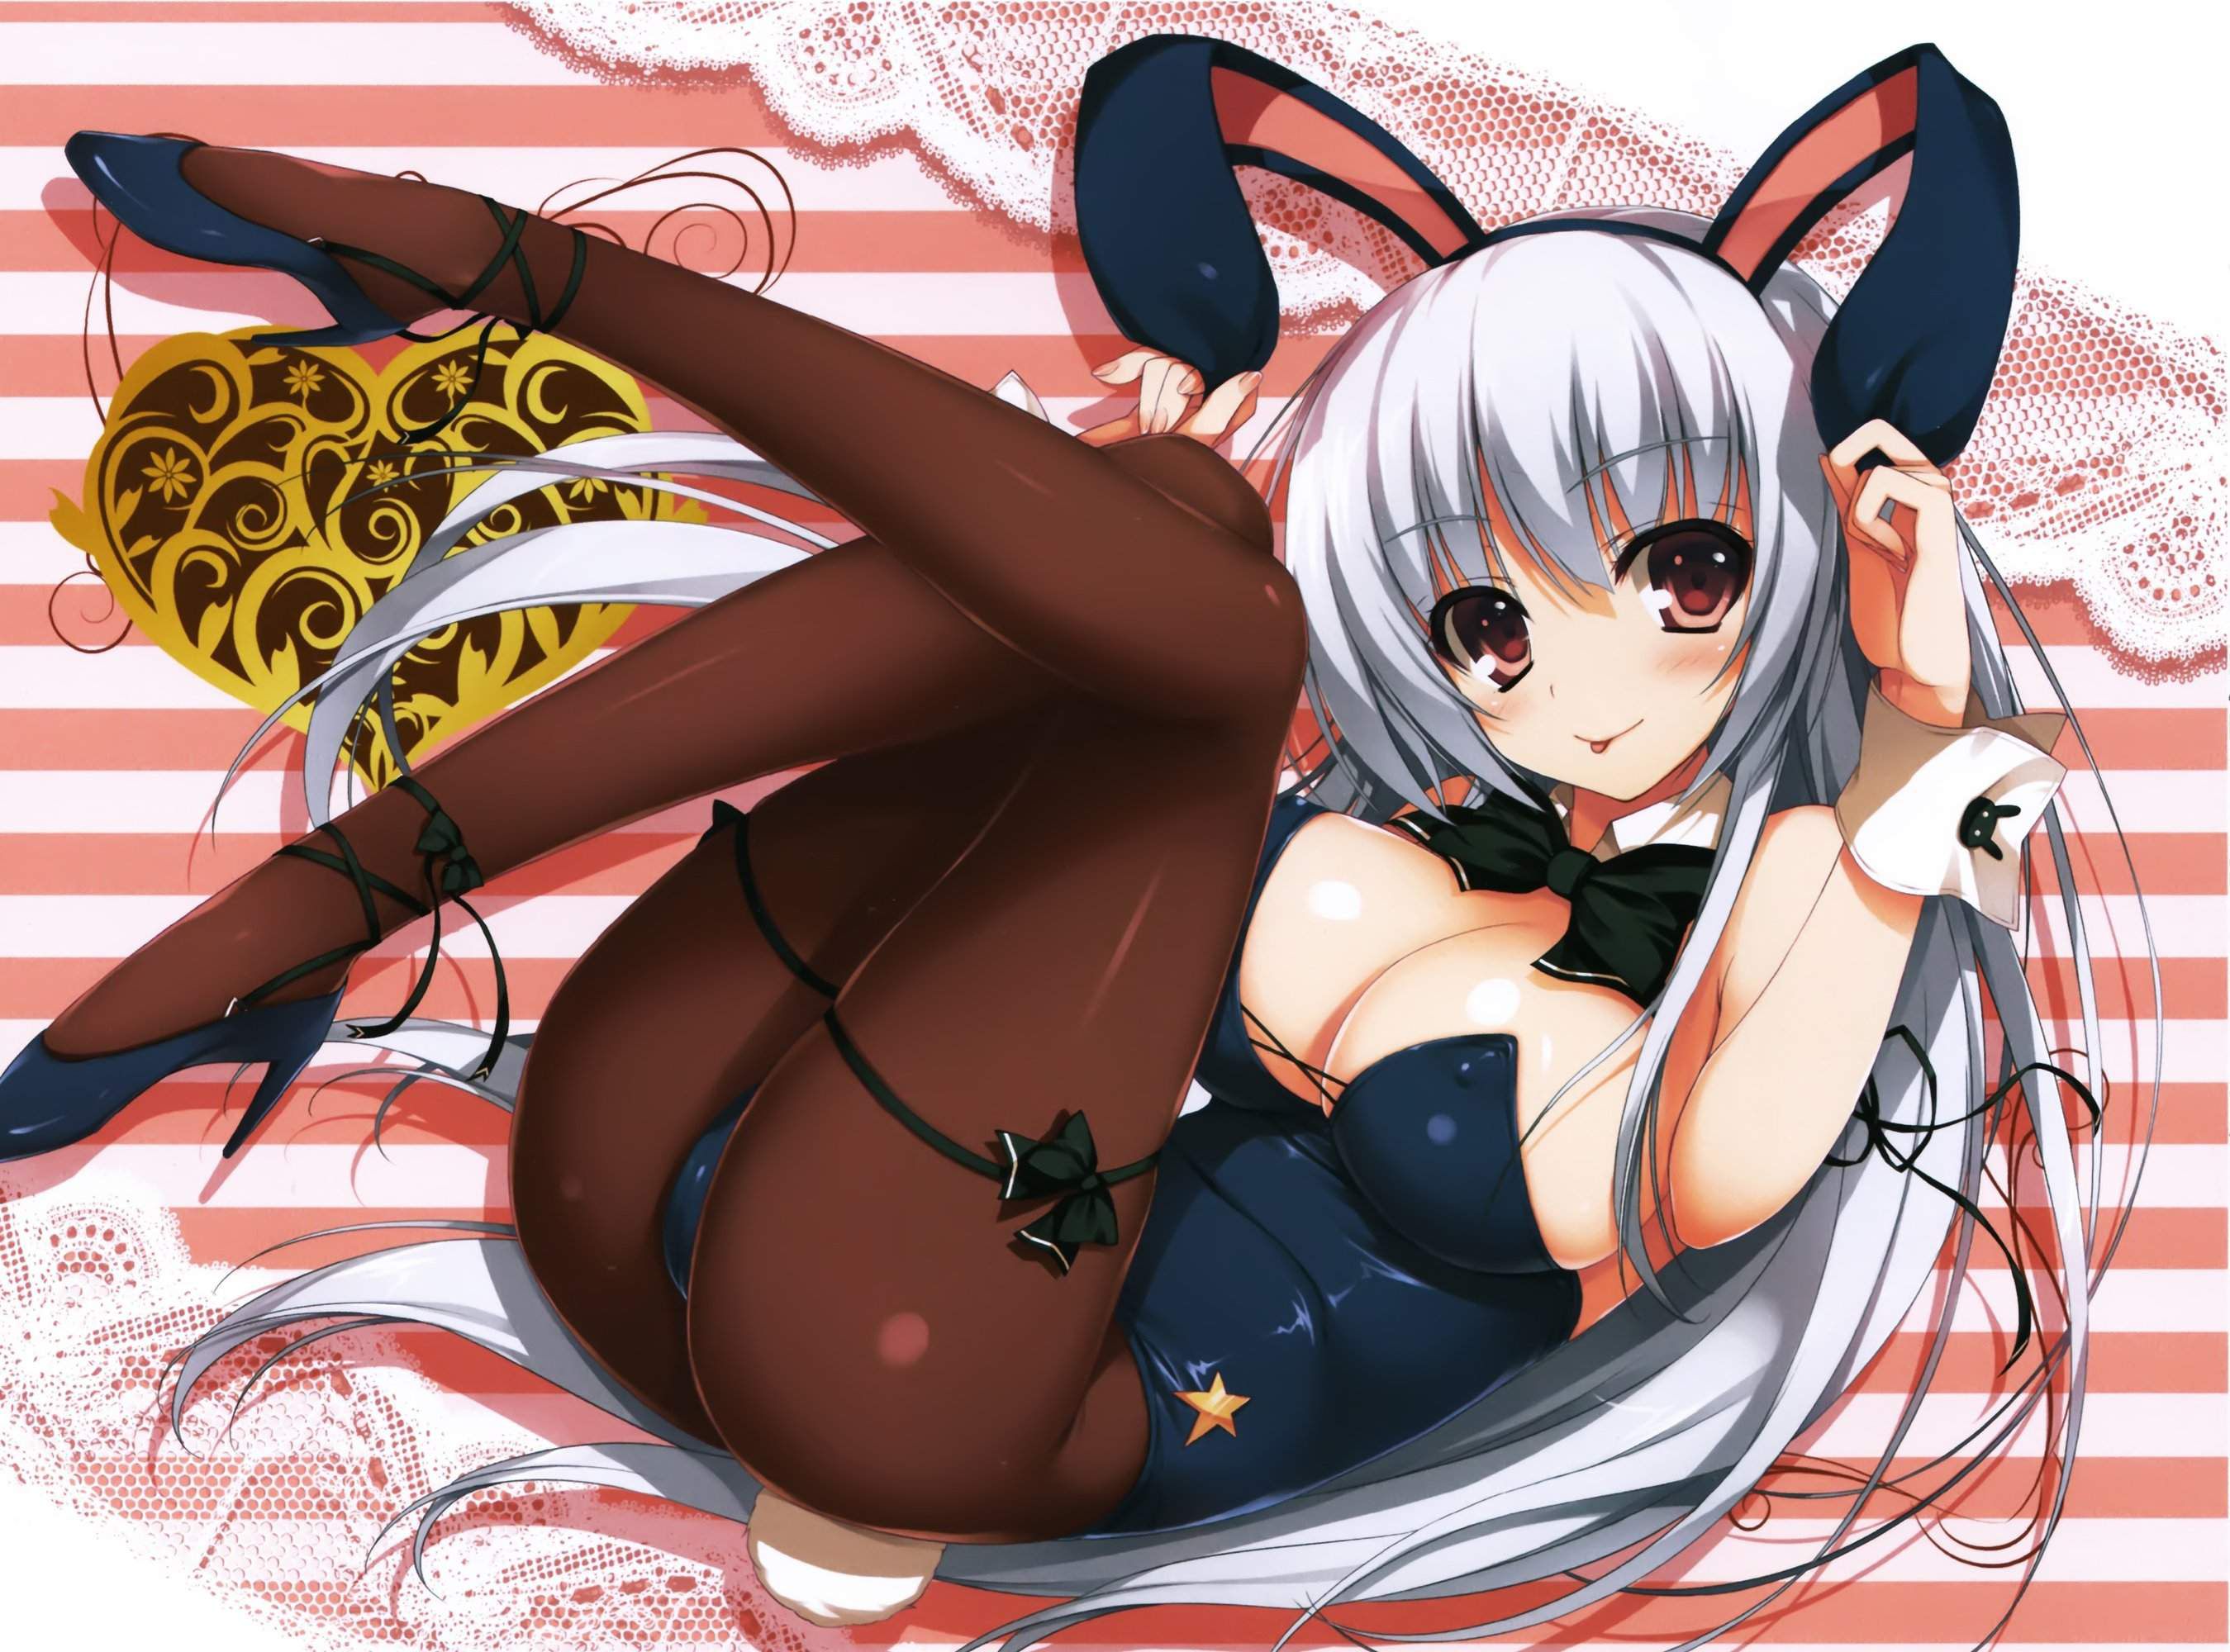 Please click here for the gentleman who likes the image of Bunny Girl. 10